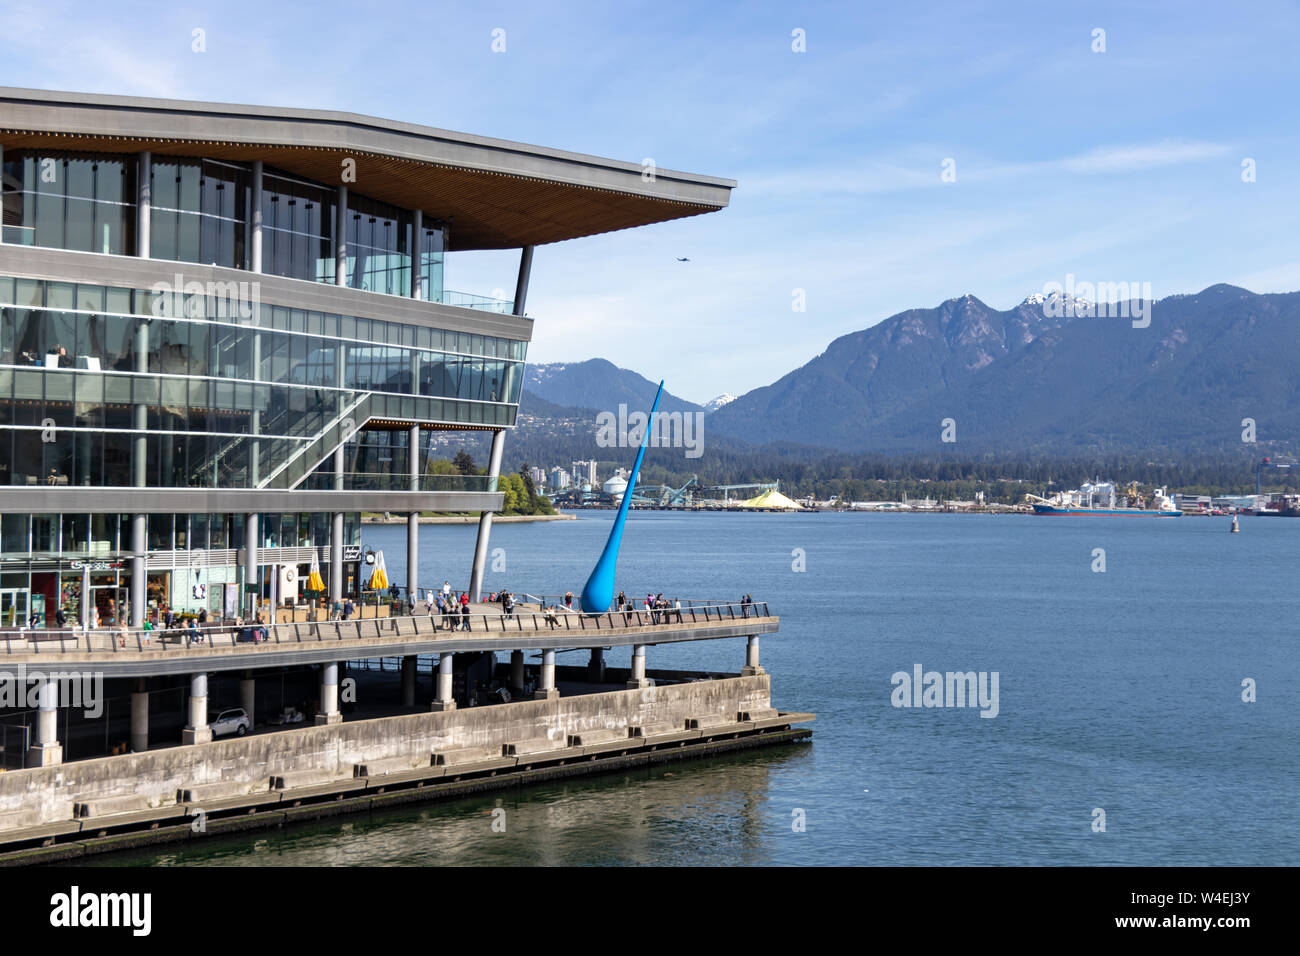 Burrard Landing at the Port of Vancouver seen with some industrial facilities across the harbour in the background on a beautiful spring day. Stock Photo